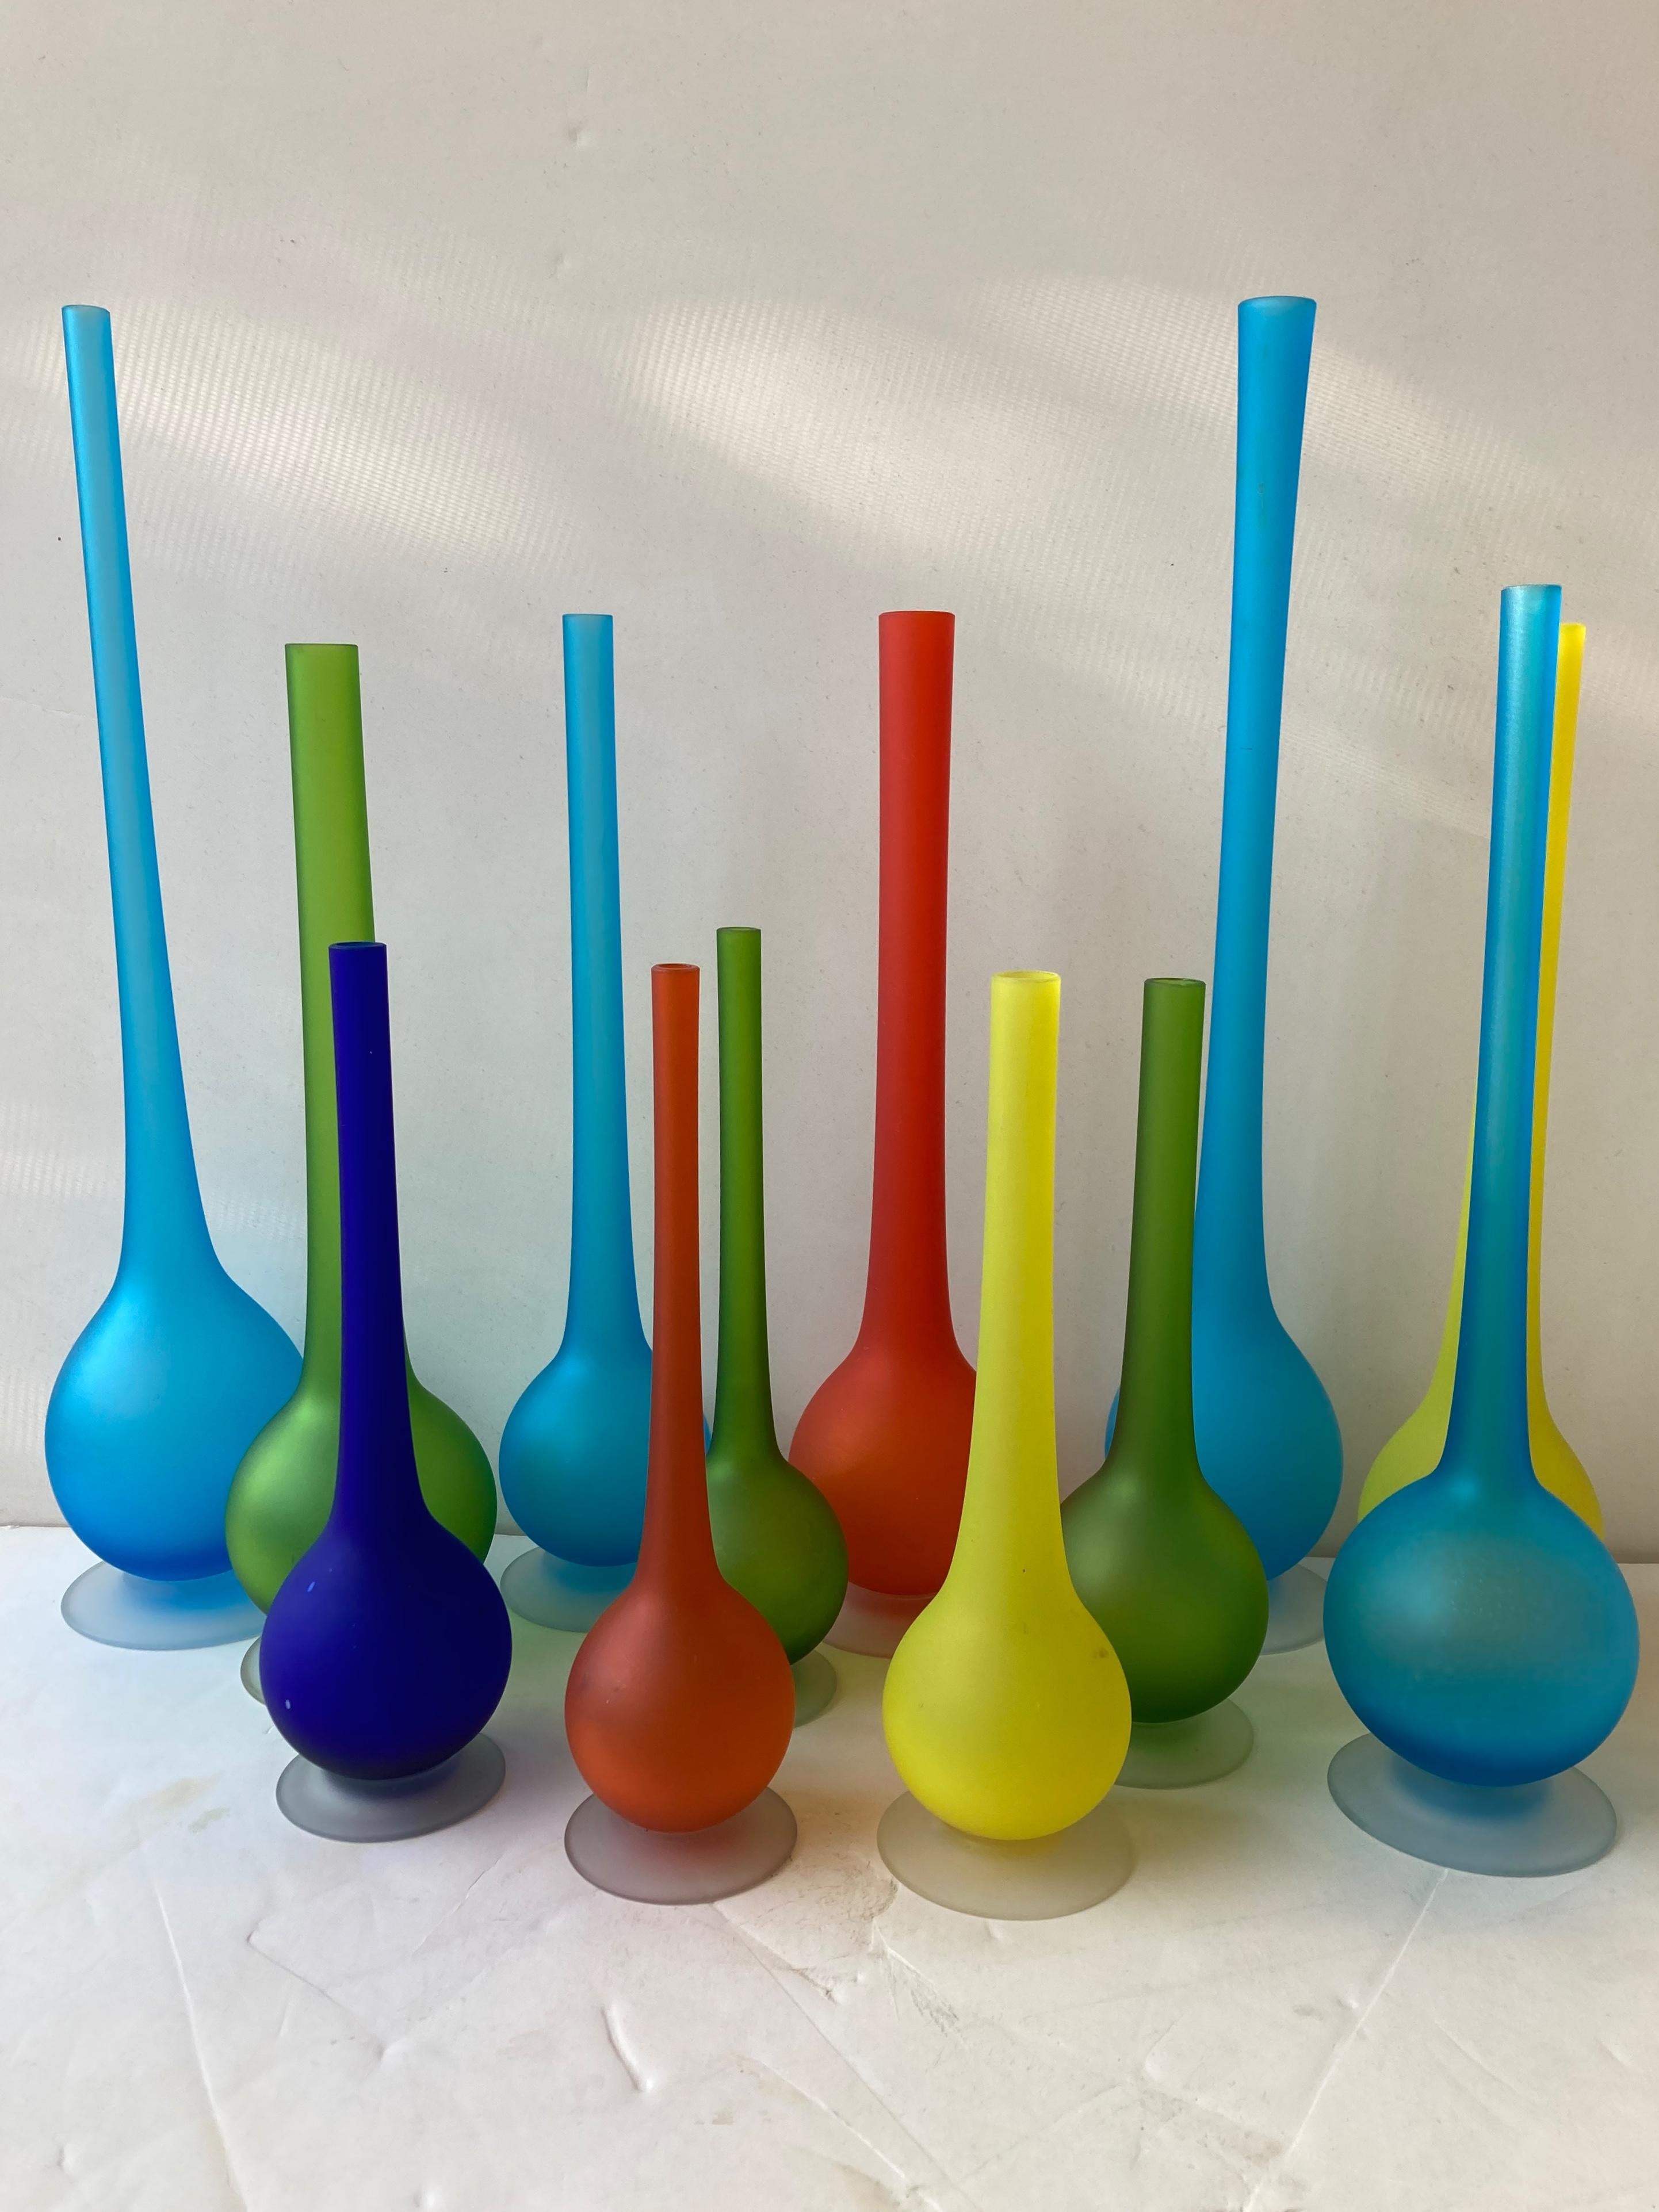 Beautiful, colorful collection of 12 satin pencil neck shape vases designed by Il maestro Carlo Moretti.

Assorted sizes from 10 to 18 inches high. 